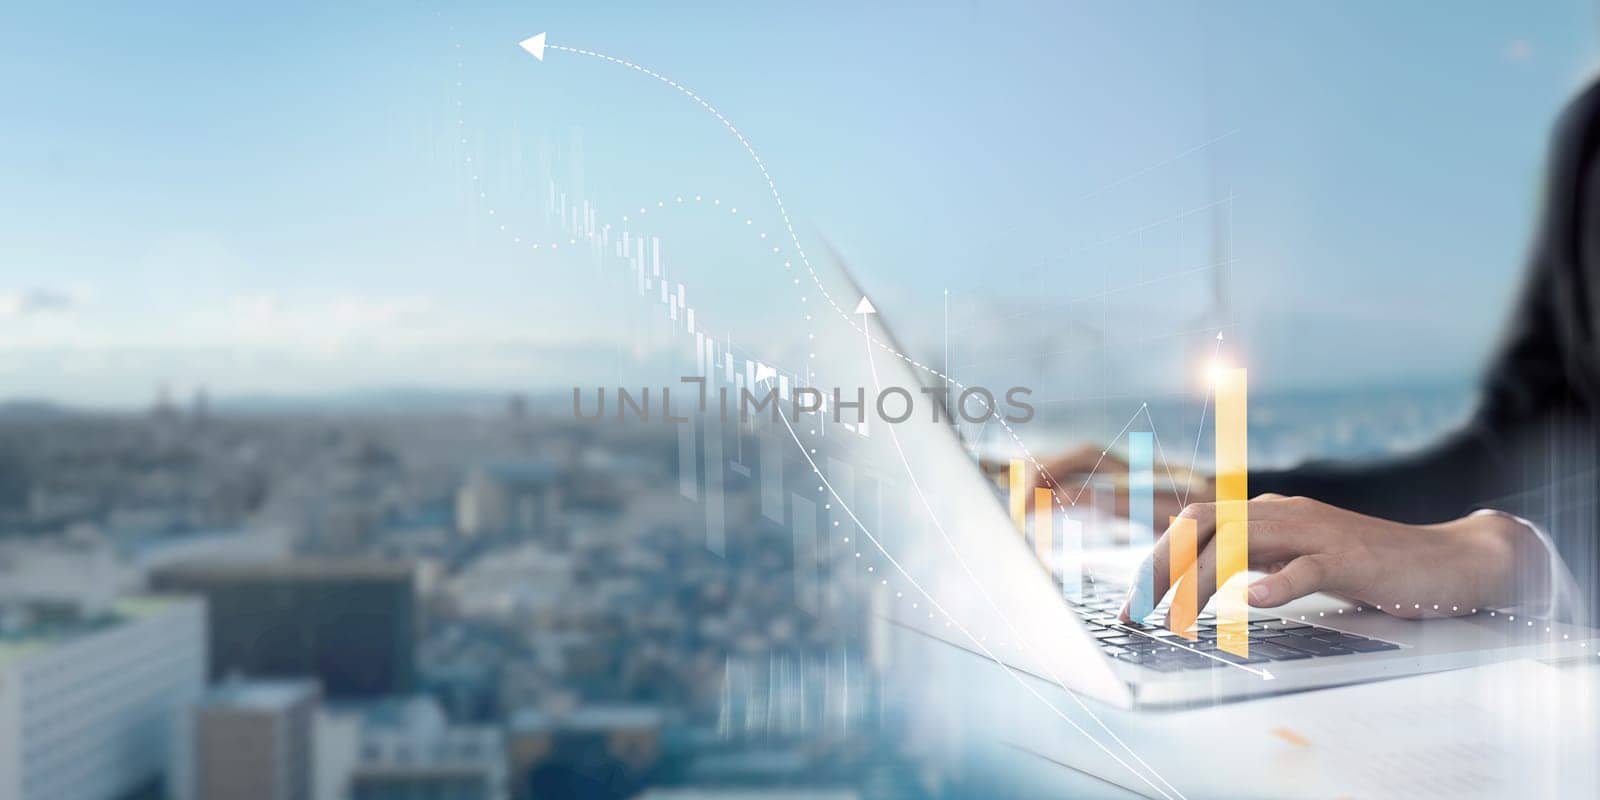 A person is typing on a laptop in front of a city skyline. Concept of productivity and focus, as the person is working on a task in a busy urban environment